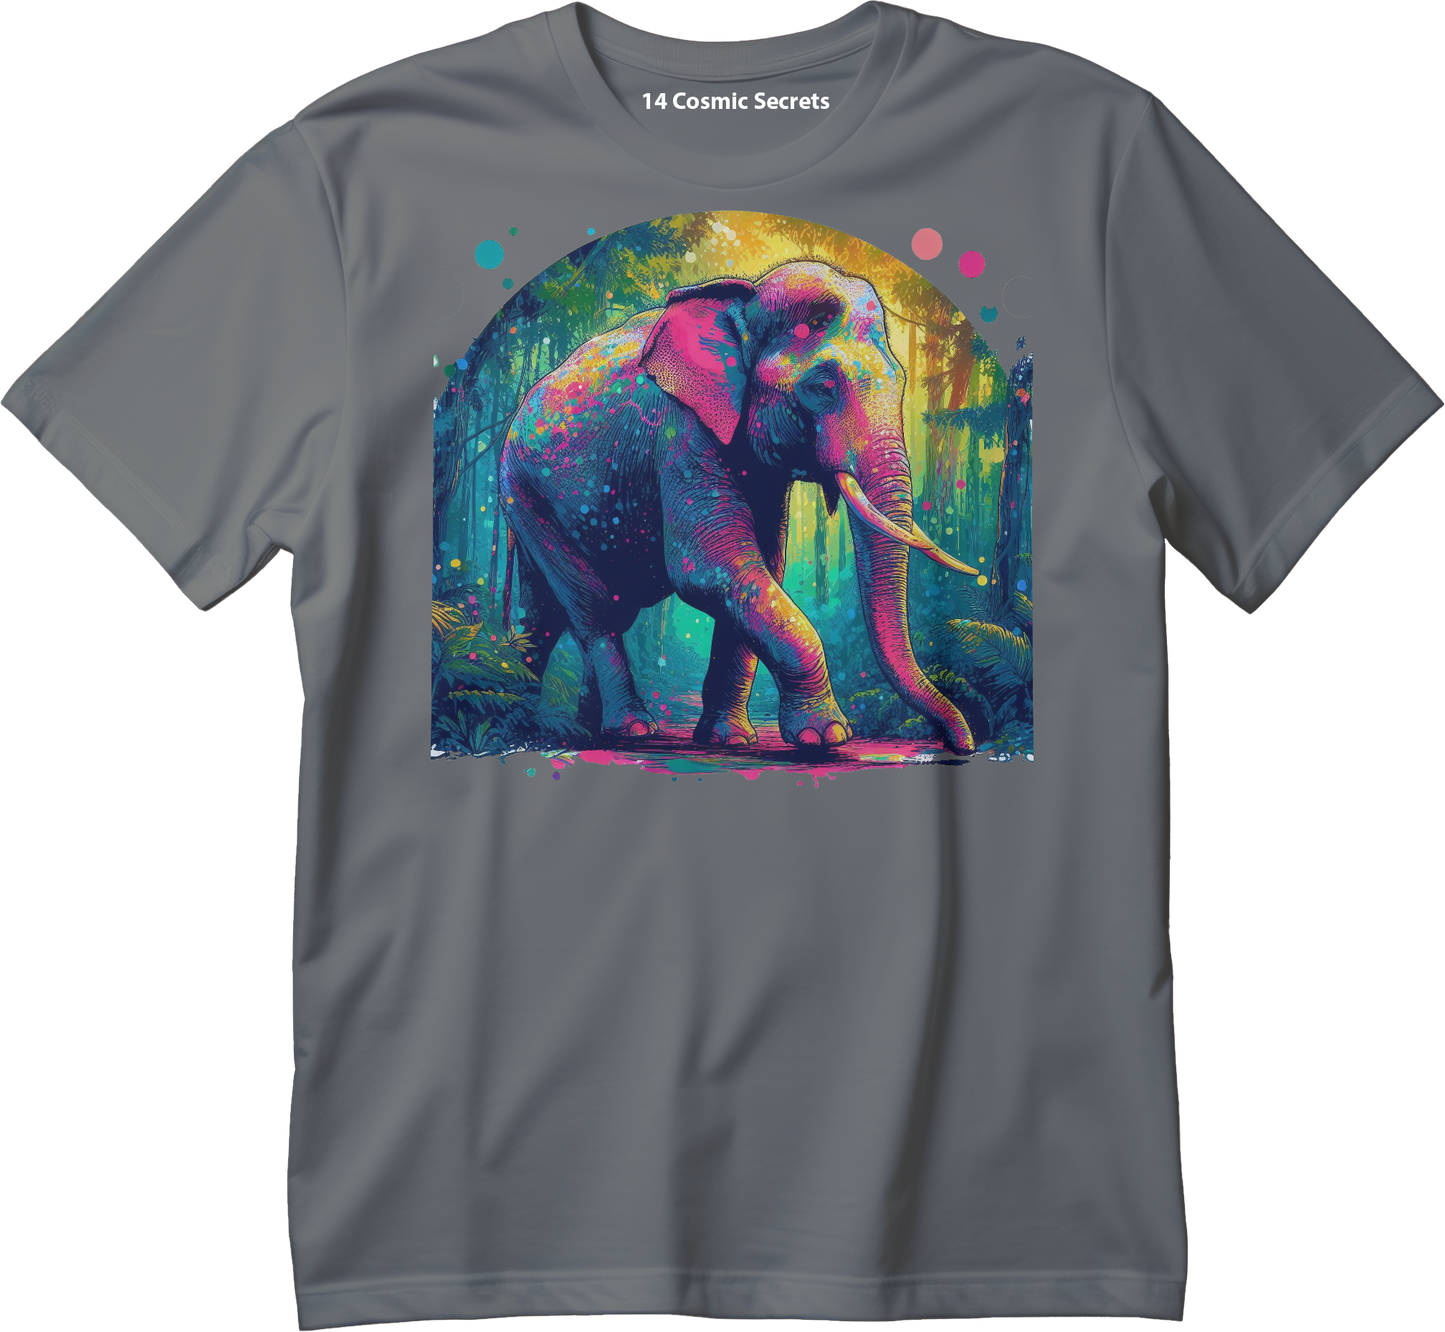 Graceful Trunked Guardian Tee  Graphic Printed T-Shirt  Cotton T-Shirt Magnificence of India T-Shirt